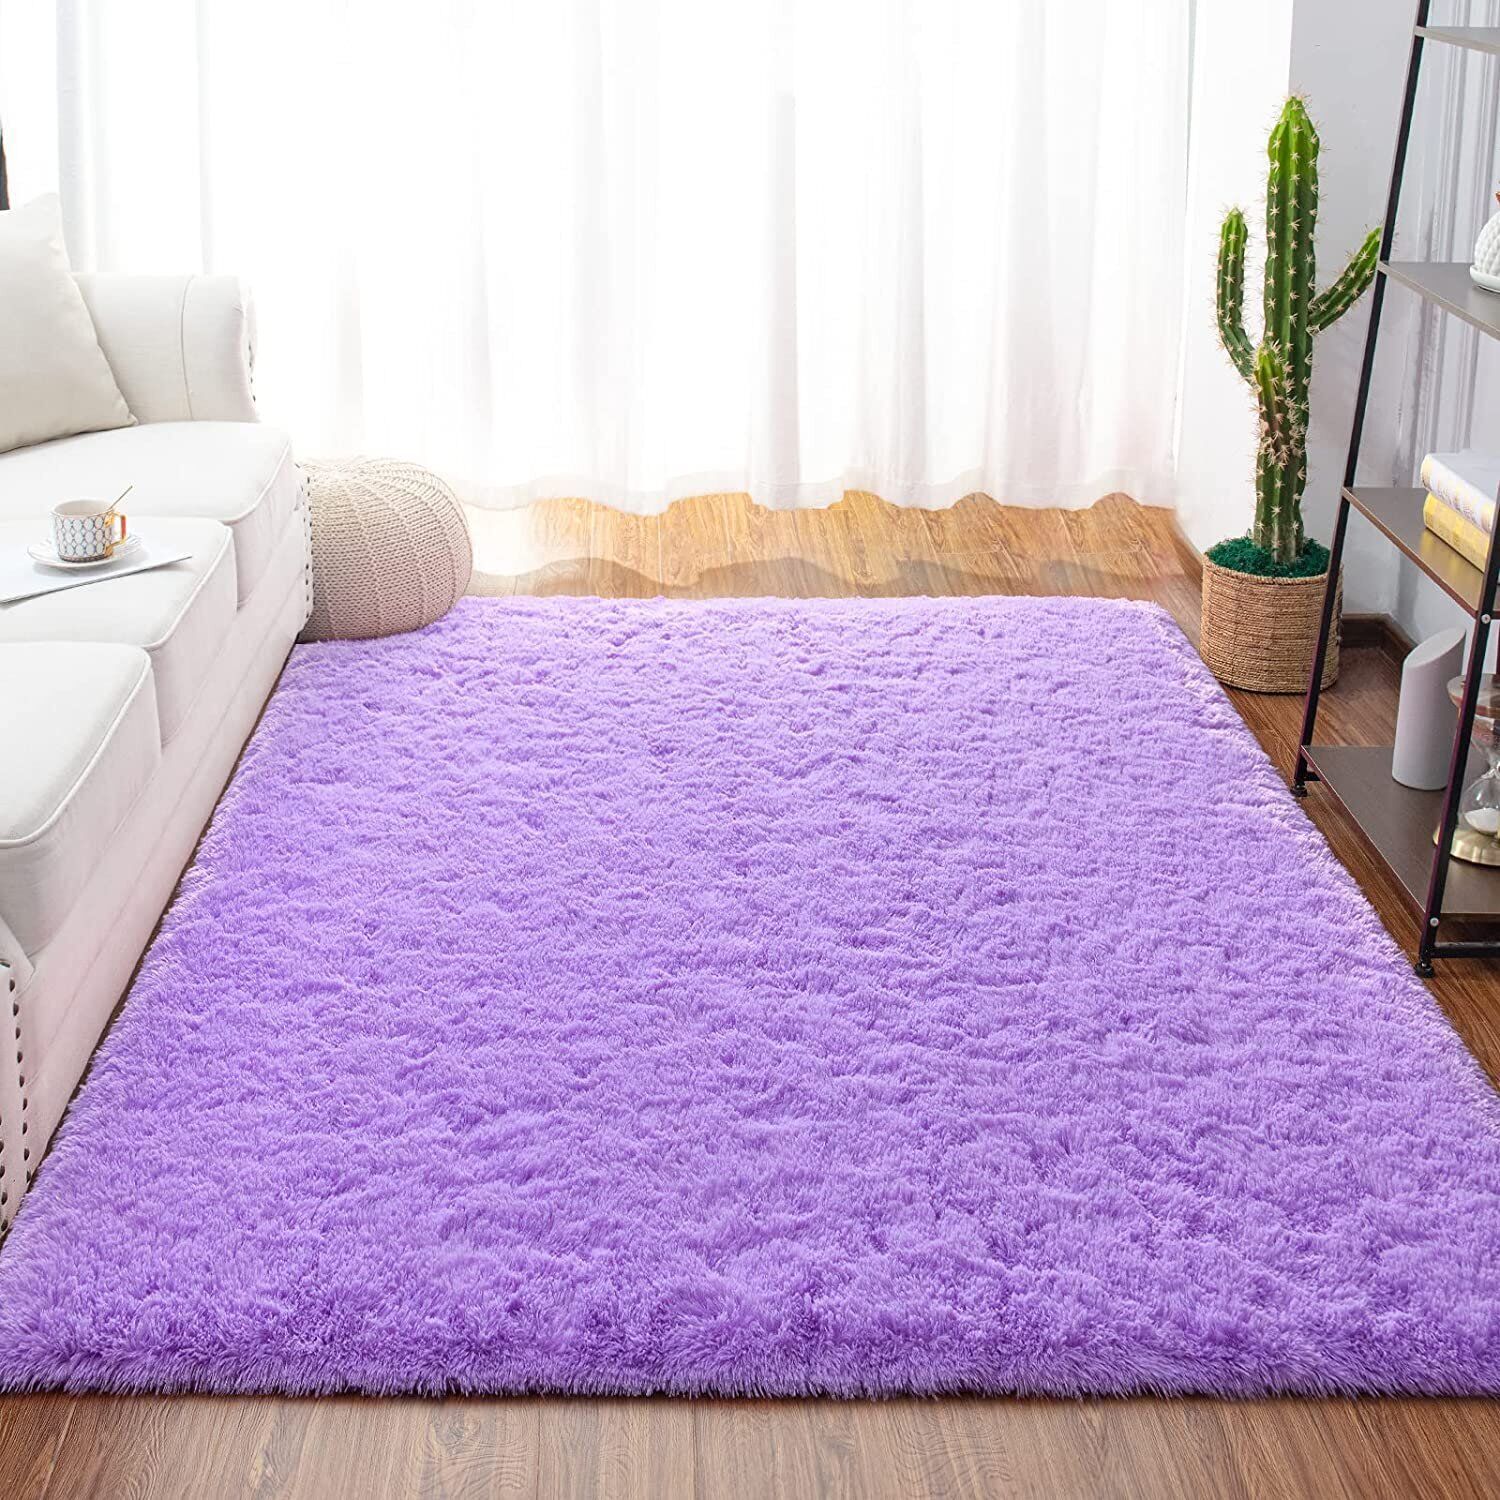 Solid Purple Shag Carpet Area Rug Indoor Mat Faux Fur 4 X 5.3 X 7.5 X 6 X 9  Ft | Ebay Within Purple Rugs (Photo 10 of 15)